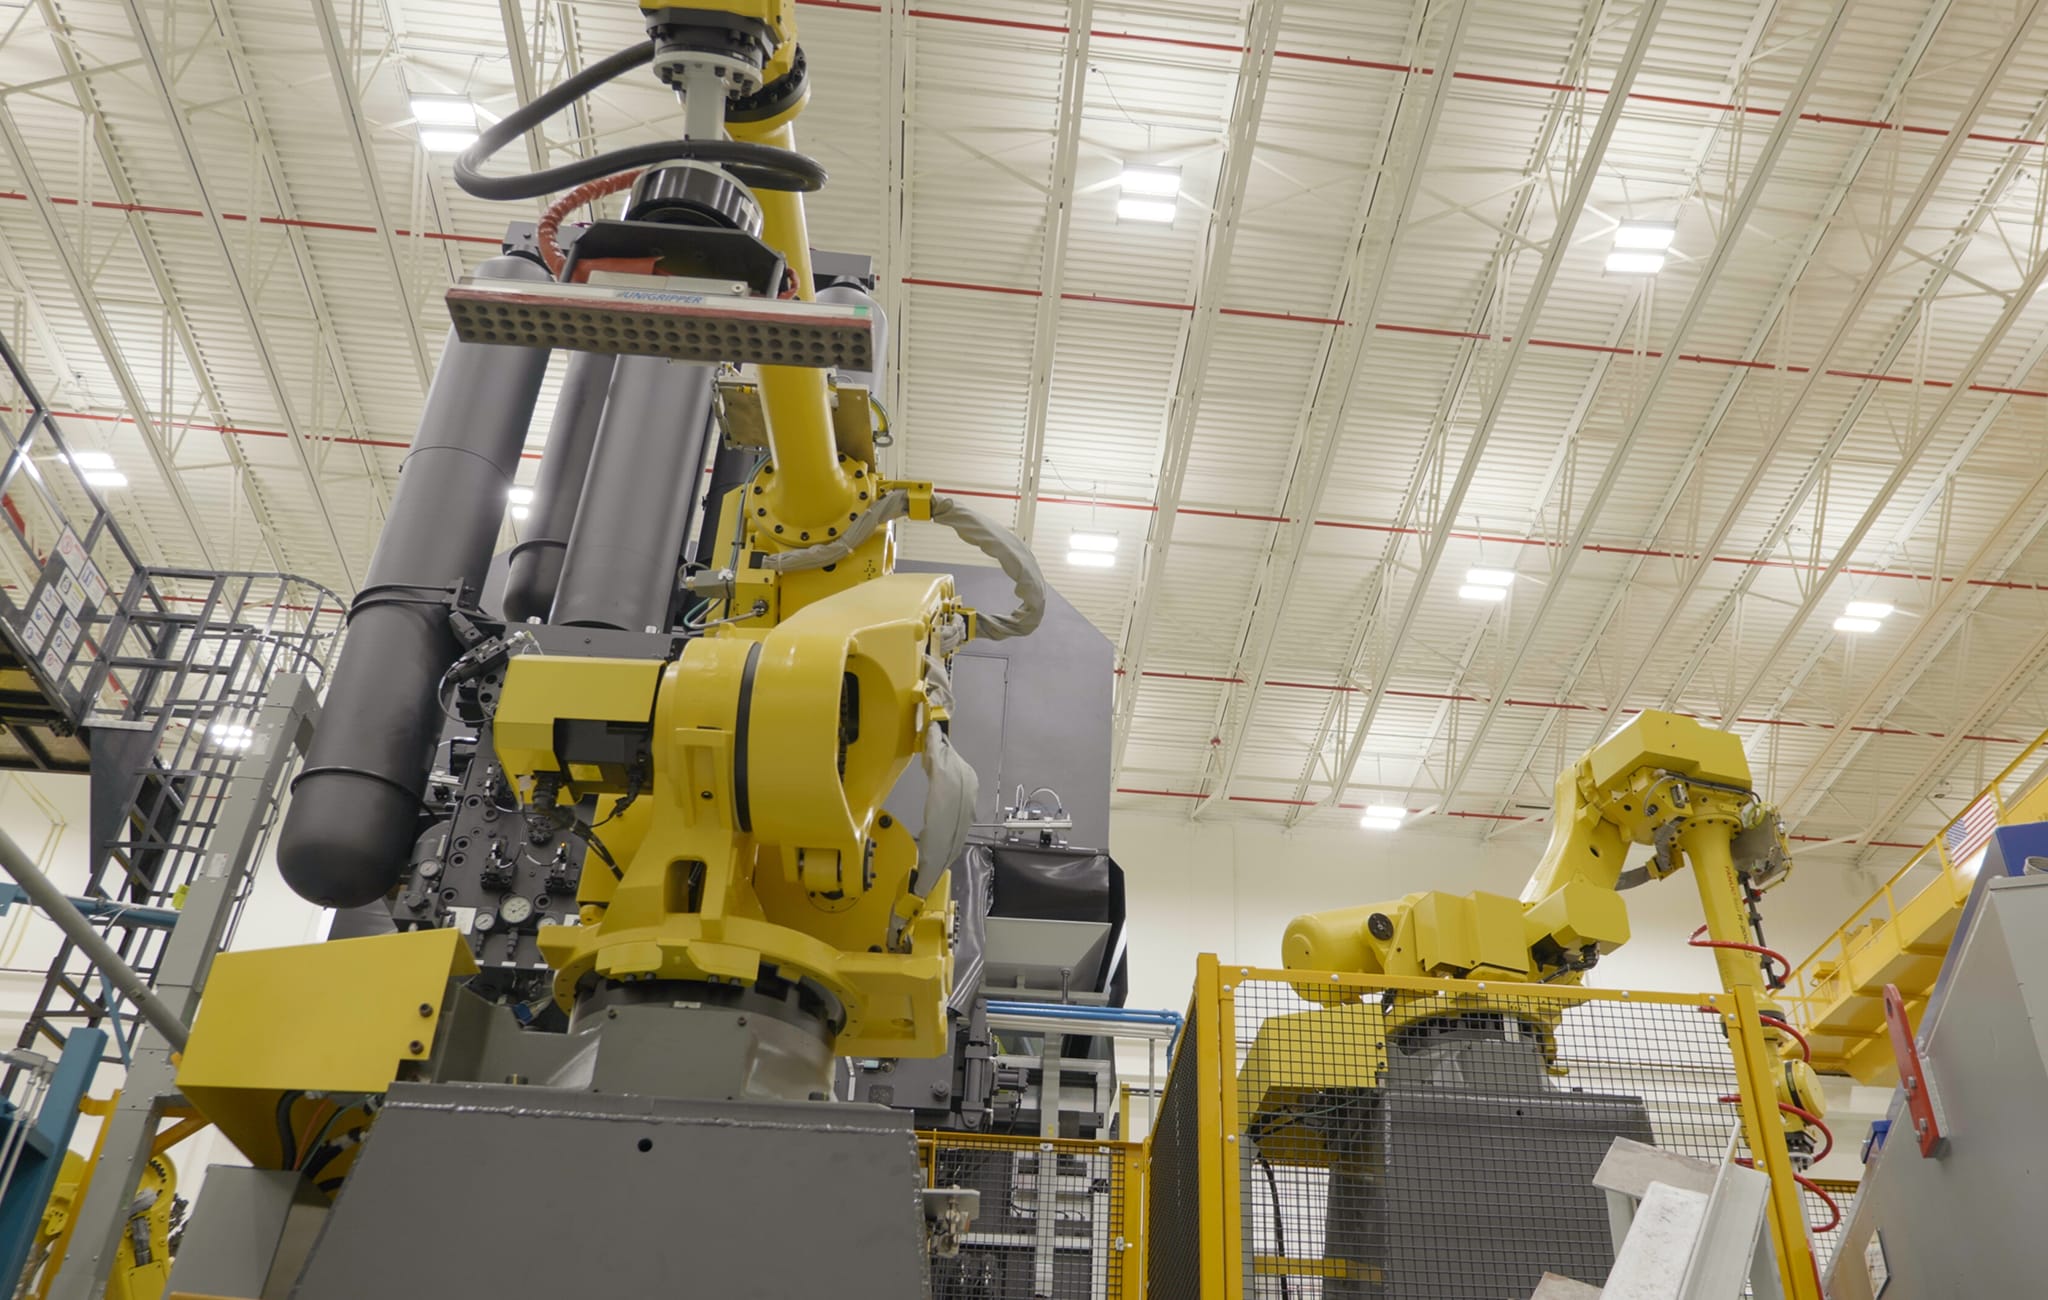 Two large yellow industrial robots with articulated arms behind safety barriers in a bright, spacious warehouse.